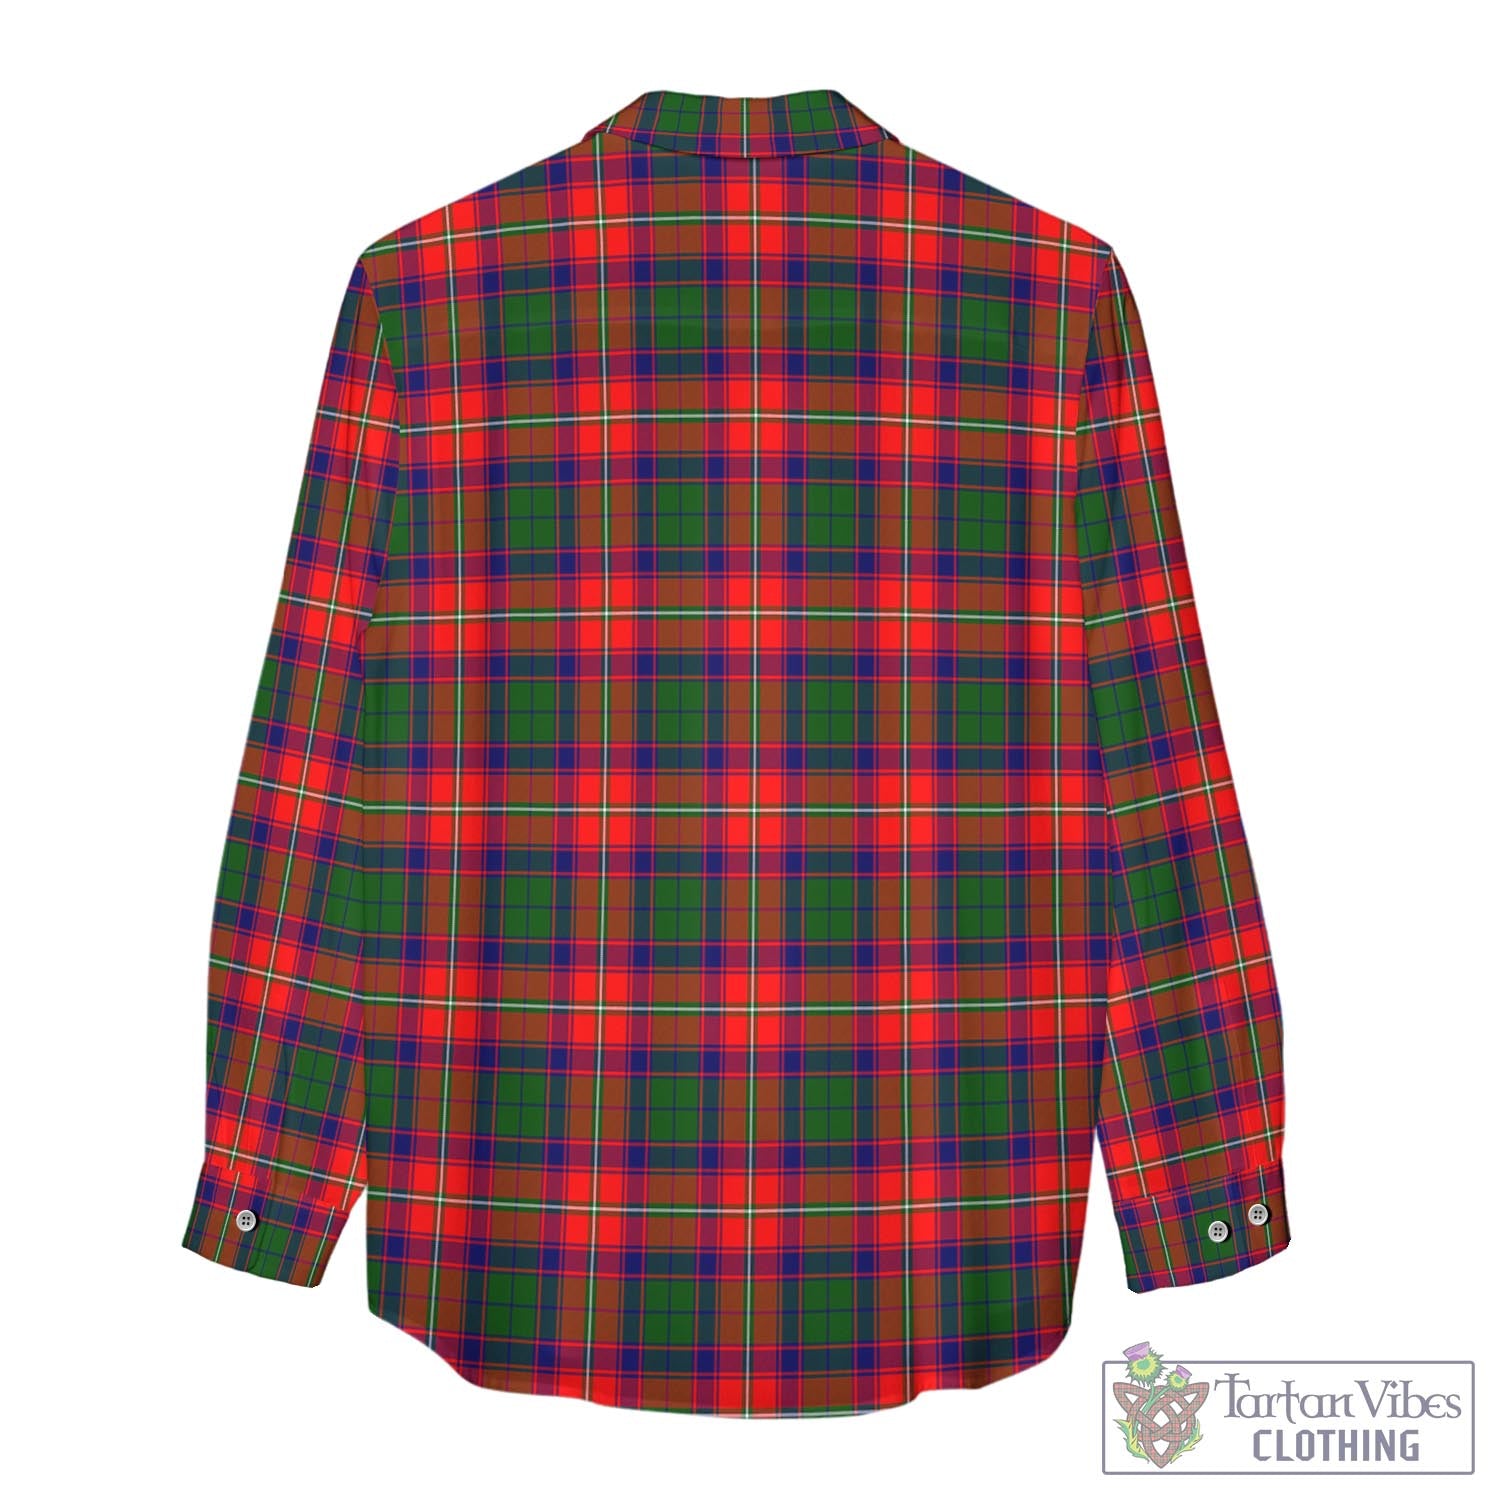 Tartan Vibes Clothing Riddell Tartan Womens Casual Shirt with Family Crest